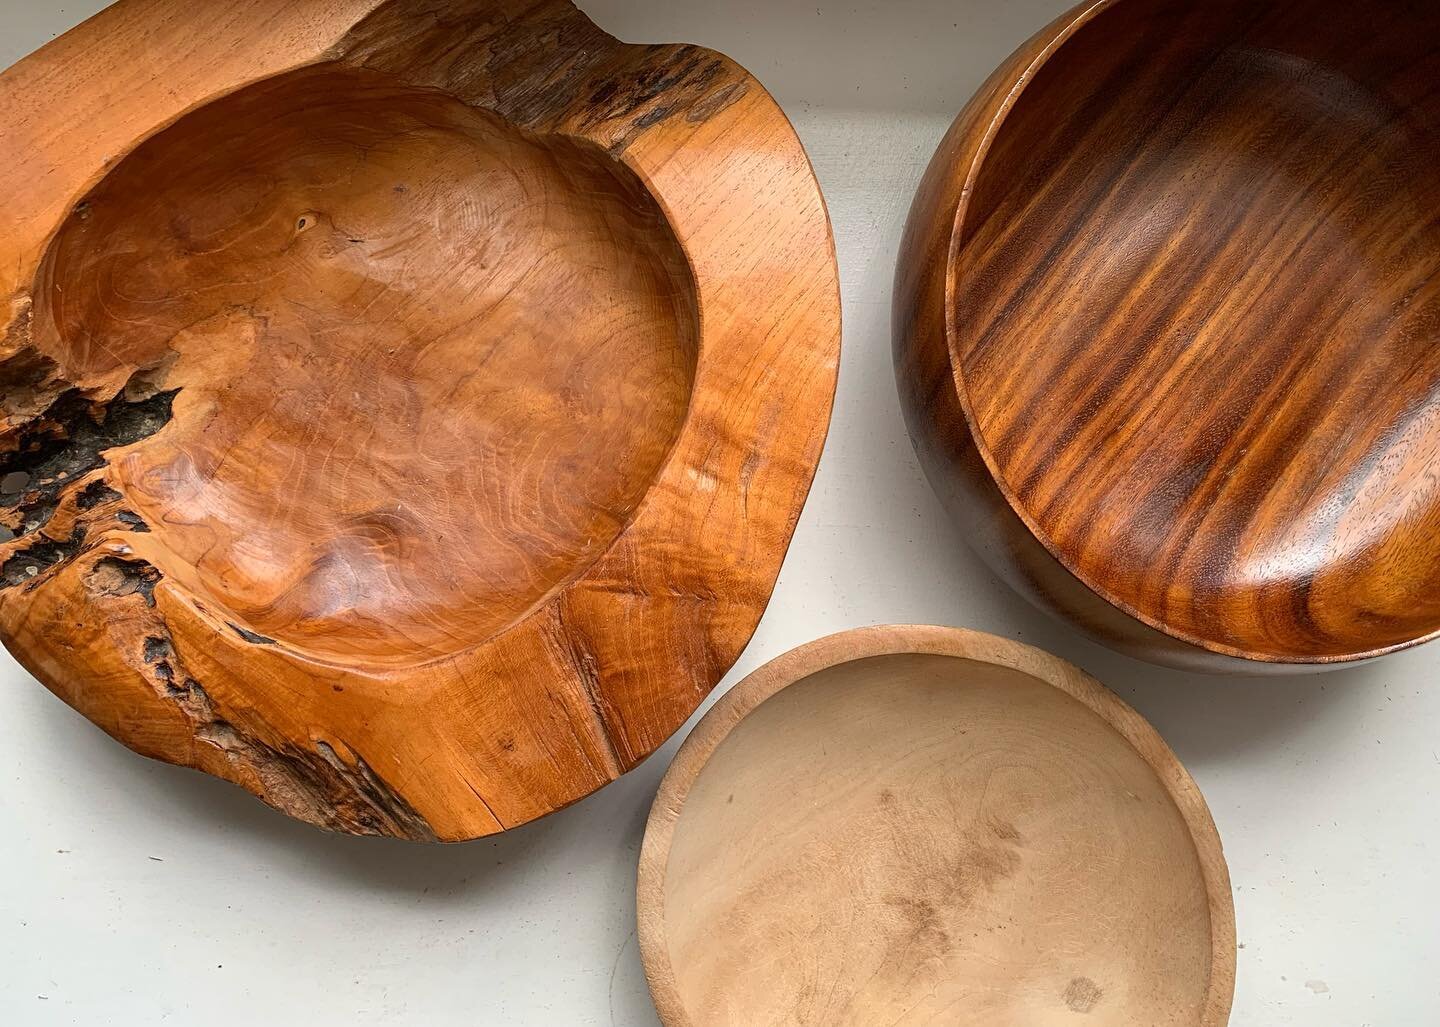 A trio of wooden catch all&rsquo;s, late 19th c. raw toned farmhouse bowl 11x3&rdquo;H $58.00, a beautiful wood grain mid century bowl 12x5&rdquo;H 🔴 and a carved organic shape wooden bowl 15x4&rdquo; 🔴 #citycountrycottagecabin #farmhousedecor #int